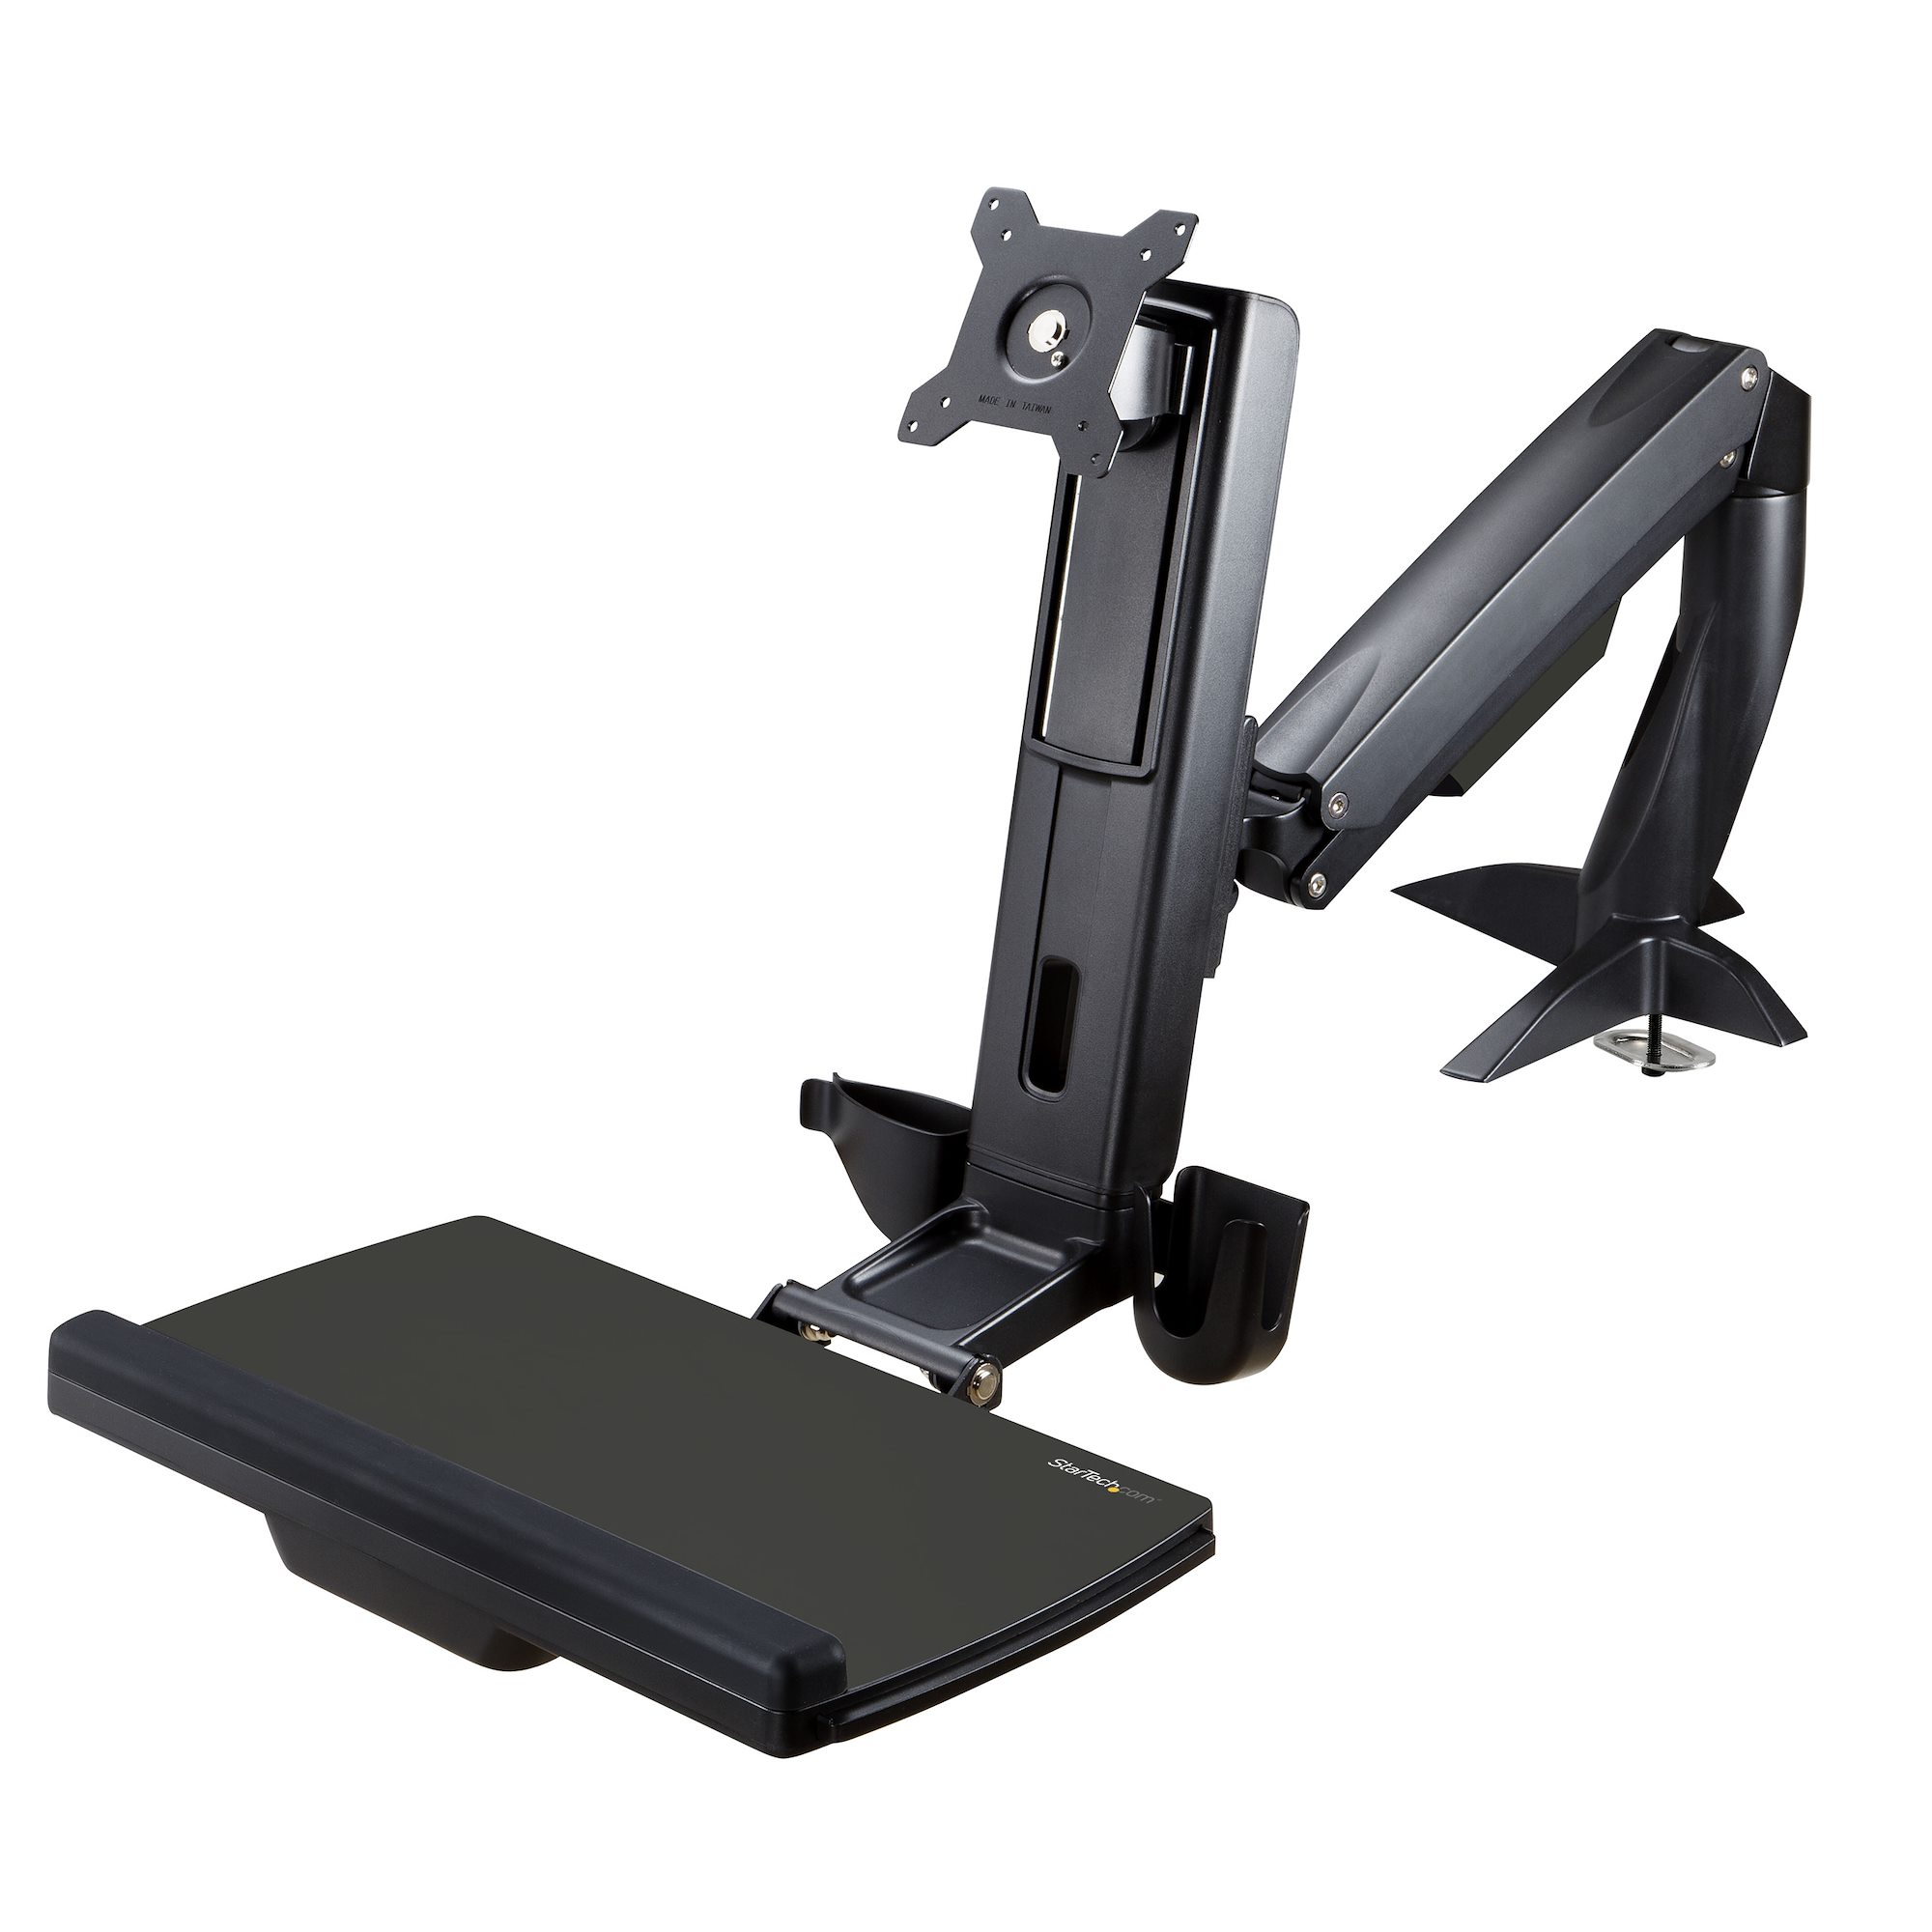 Sit Stand Monitor Arm – Desk Mount Adjustable Sit-Stand